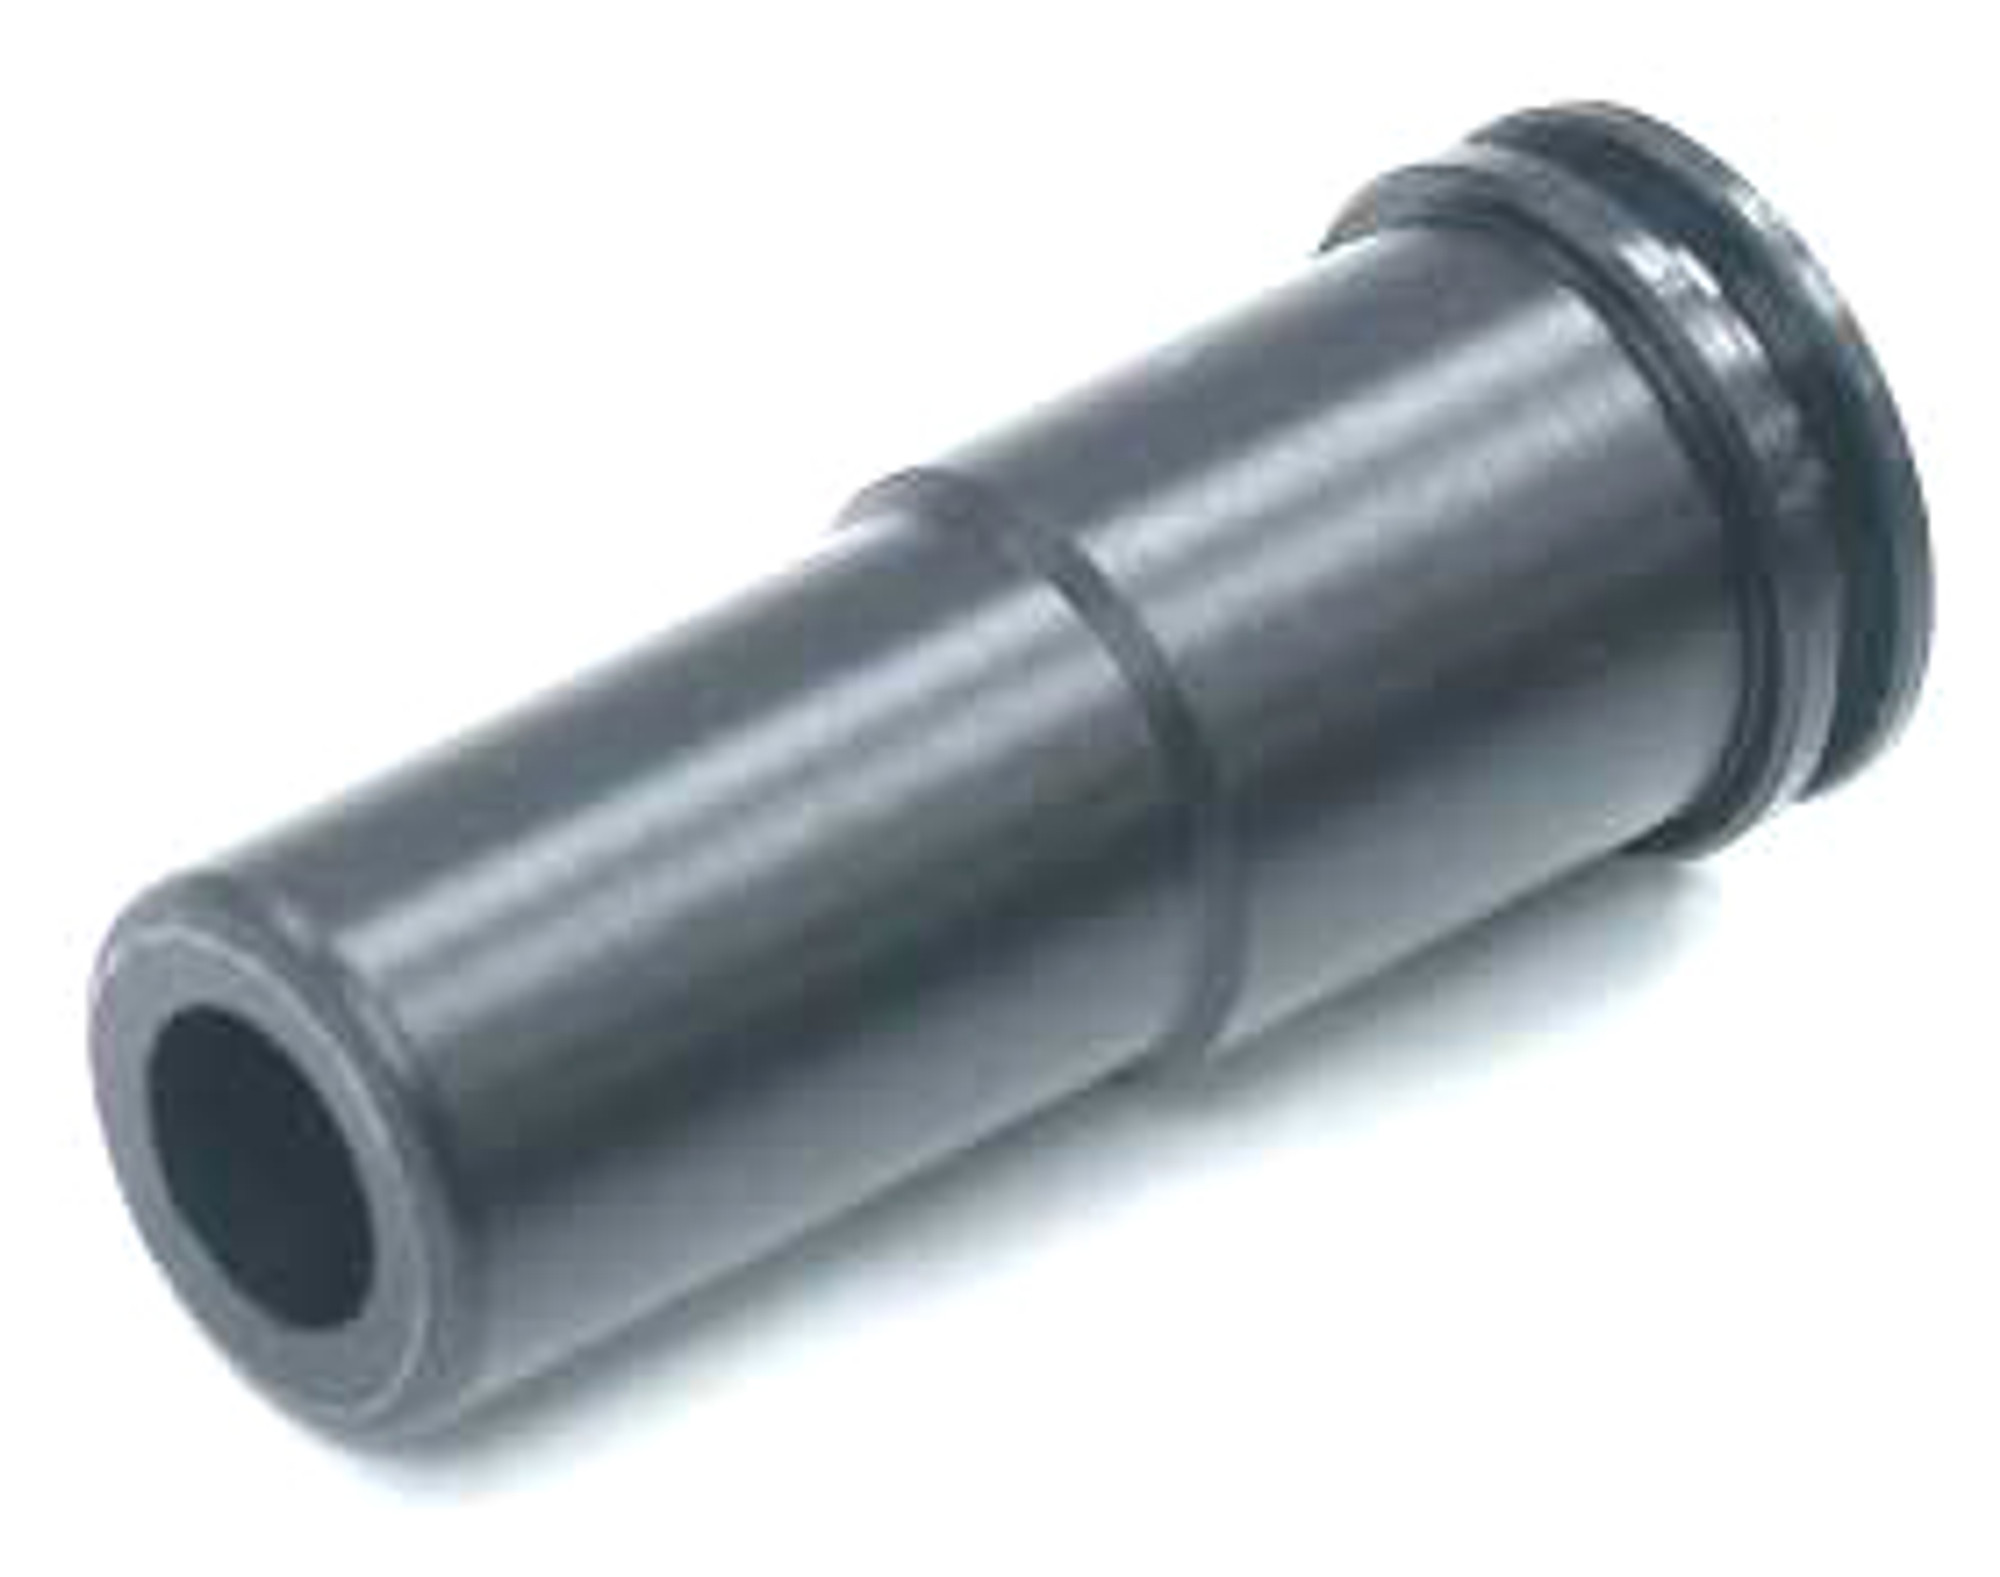 Guarder High Precision Oil Tampered Nozzle for SIG 550 / 551.